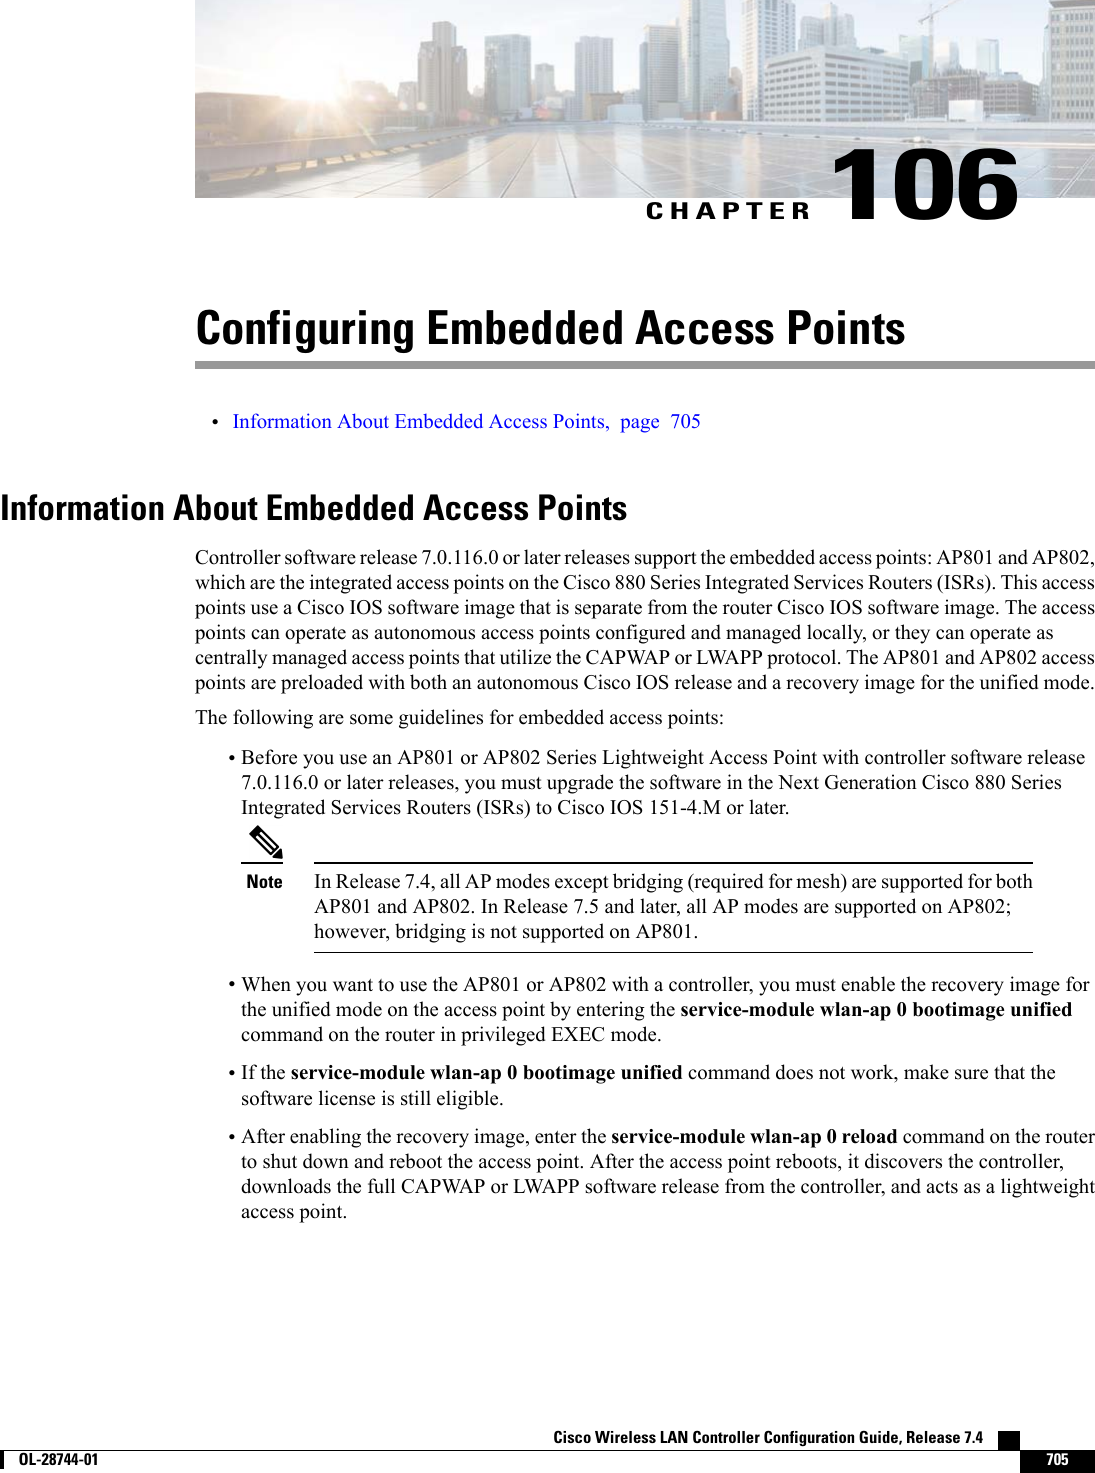 CHAPTER 106Configuring Embedded Access Points•Information About Embedded Access Points, page 705Information About Embedded Access PointsController software release 7.0.116.0 or later releases support the embedded access points: AP801 and AP802,which are the integrated access points on the Cisco 880 Series Integrated Services Routers (ISRs). This accesspoints use a Cisco IOS software image that is separate from the router Cisco IOS software image. The accesspoints can operate as autonomous access points configured and managed locally, or they can operate ascentrally managed access points that utilize the CAPWAP or LWAPP protocol. The AP801 and AP802 accesspoints are preloaded with both an autonomous Cisco IOS release and a recovery image for the unified mode.The following are some guidelines for embedded access points:•Before you use an AP801 or AP802 Series Lightweight Access Point with controller software release7.0.116.0 or later releases, you must upgrade the software in the Next Generation Cisco 880 SeriesIntegrated Services Routers (ISRs) to Cisco IOS 151-4.M or later.In Release 7.4, all AP modes except bridging (required for mesh) are supported for bothAP801 and AP802. In Release 7.5 and later, all AP modes are supported on AP802;however, bridging is not supported on AP801.Note•When you want to use the AP801 or AP802 with a controller, you must enable the recovery image forthe unified mode on the access point by entering the service-module wlan-ap 0 bootimage unifiedcommand on the router in privileged EXEC mode.•If the service-module wlan-ap 0 bootimage unified command does not work, make sure that thesoftware license is still eligible.•After enabling the recovery image, enter the service-module wlan-ap 0 reload command on the routerto shut down and reboot the access point. After the access point reboots, it discovers the controller,downloads the full CAPWAP or LWAPP software release from the controller, and acts as a lightweightaccess point.Cisco Wireless LAN Controller Configuration Guide, Release 7.4        OL-28744-01 705